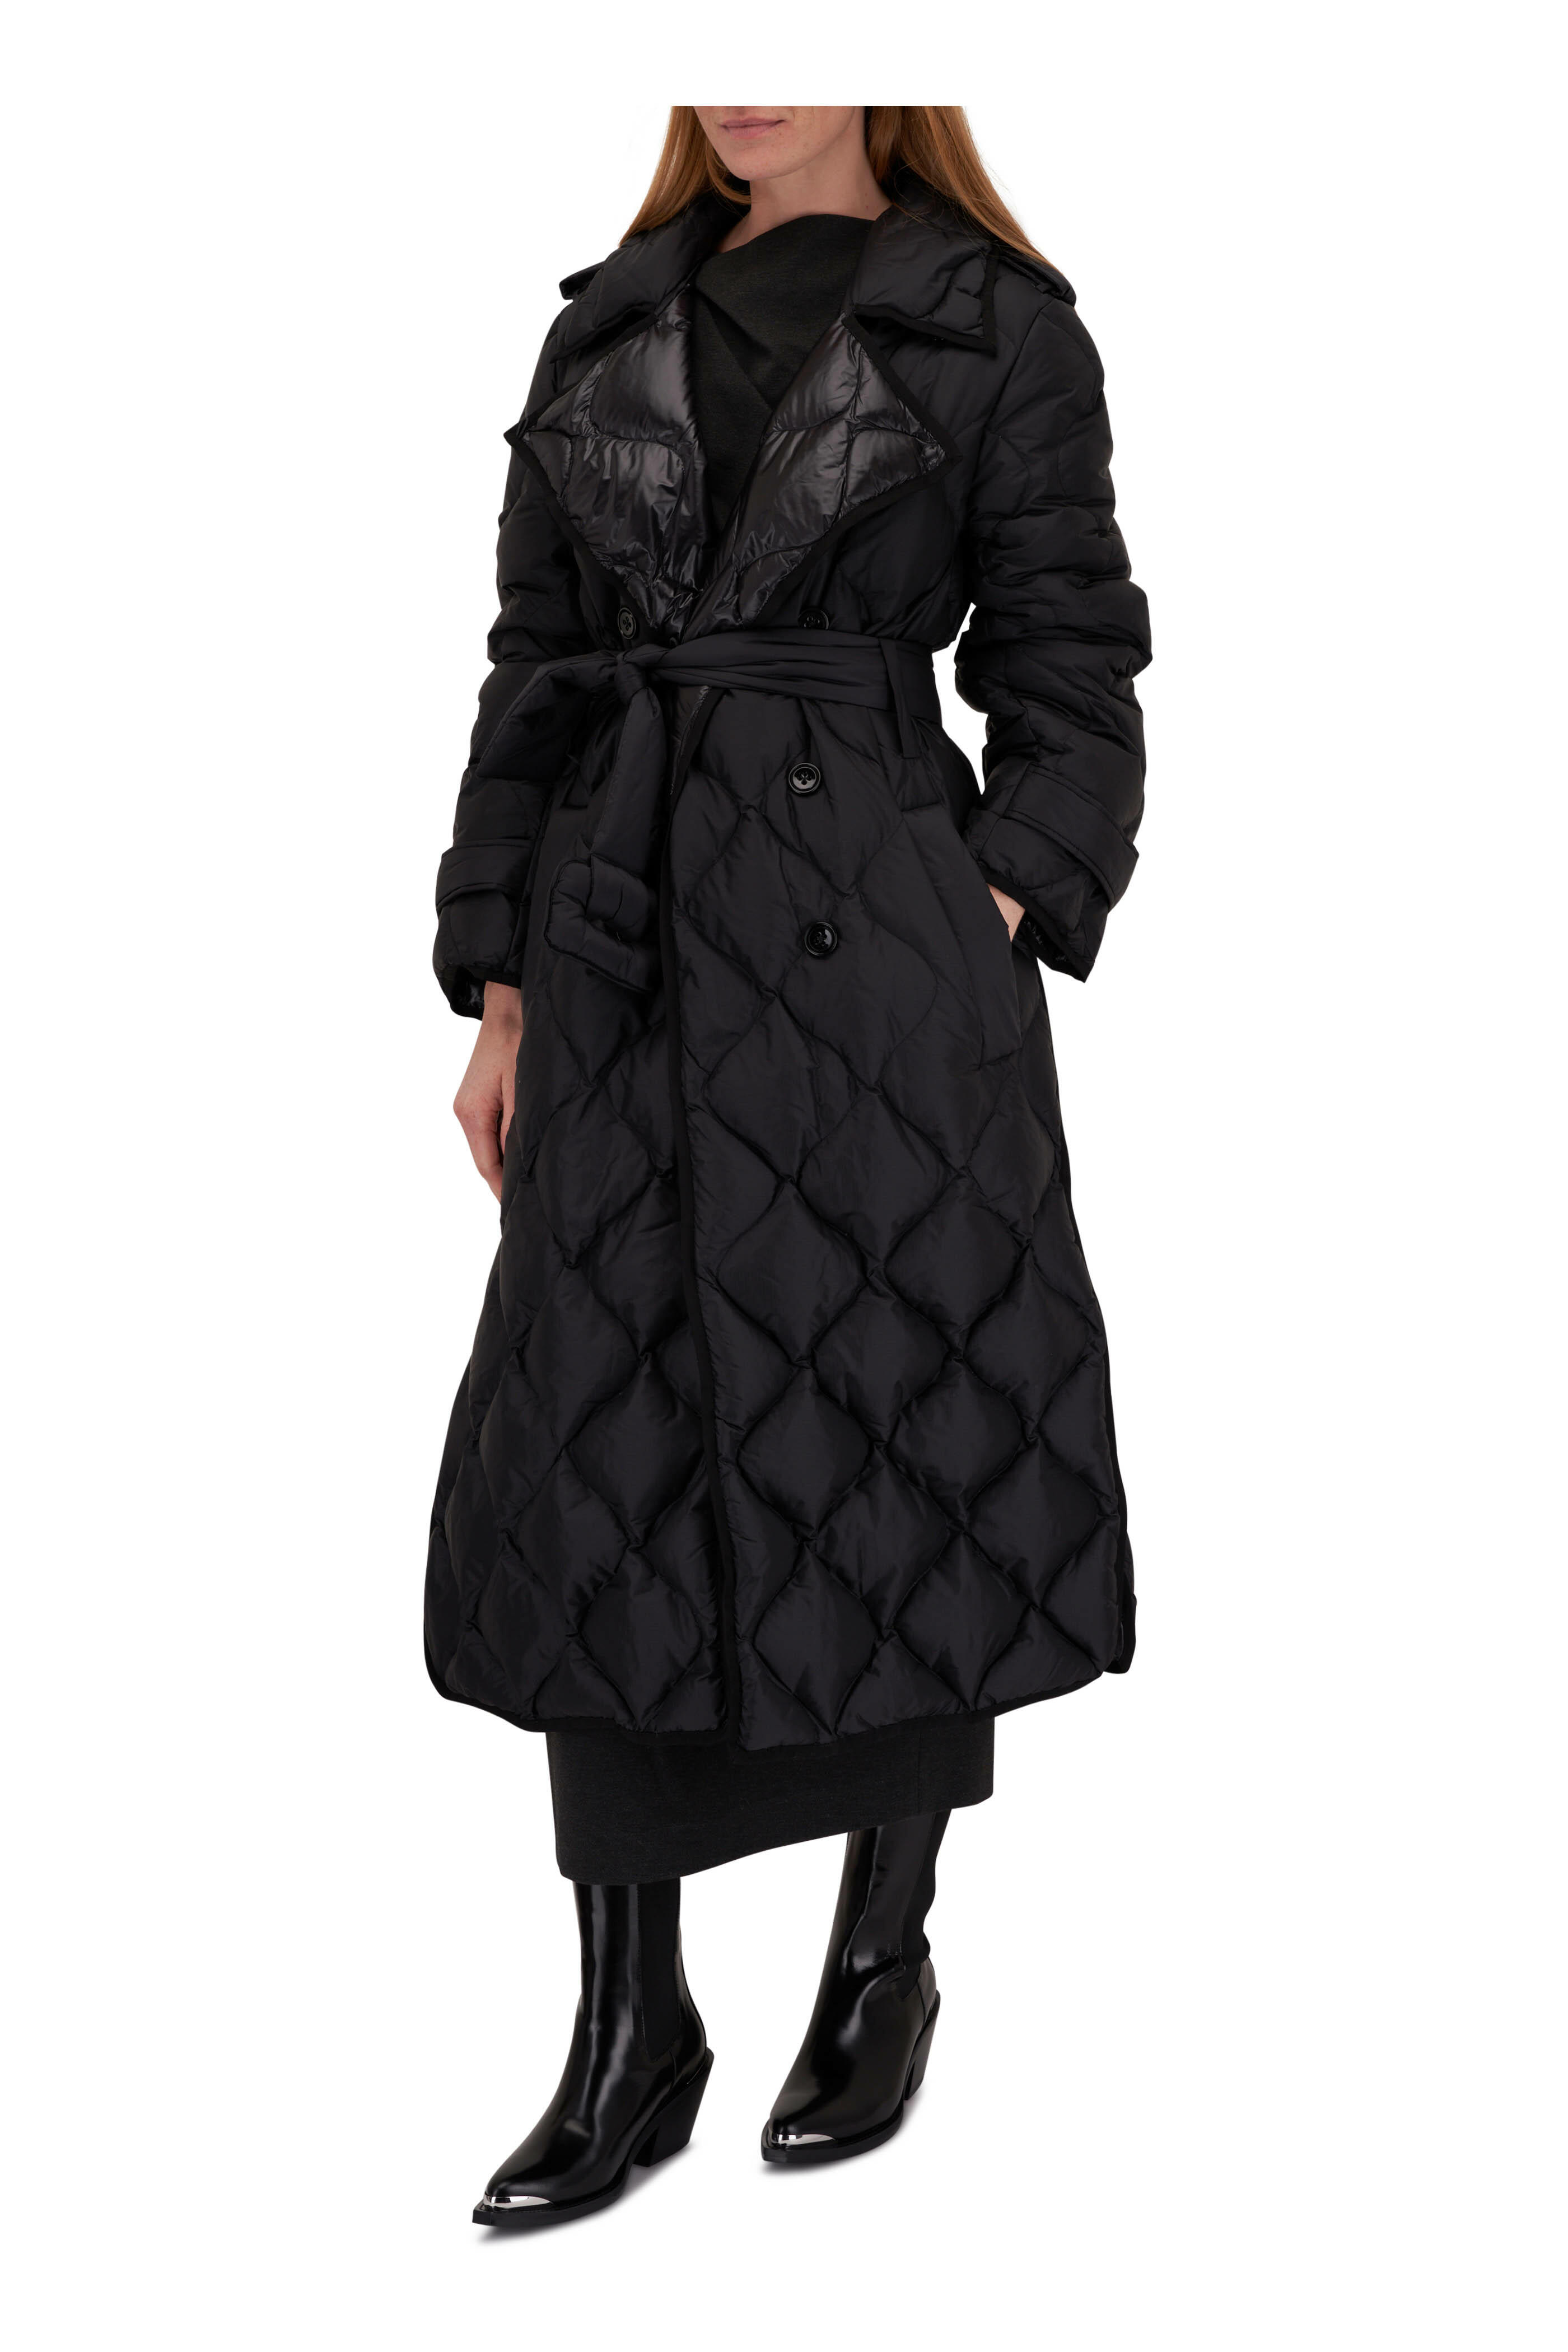 Dorothee Schumacher - Cozy Coolness Black Quilted Trench